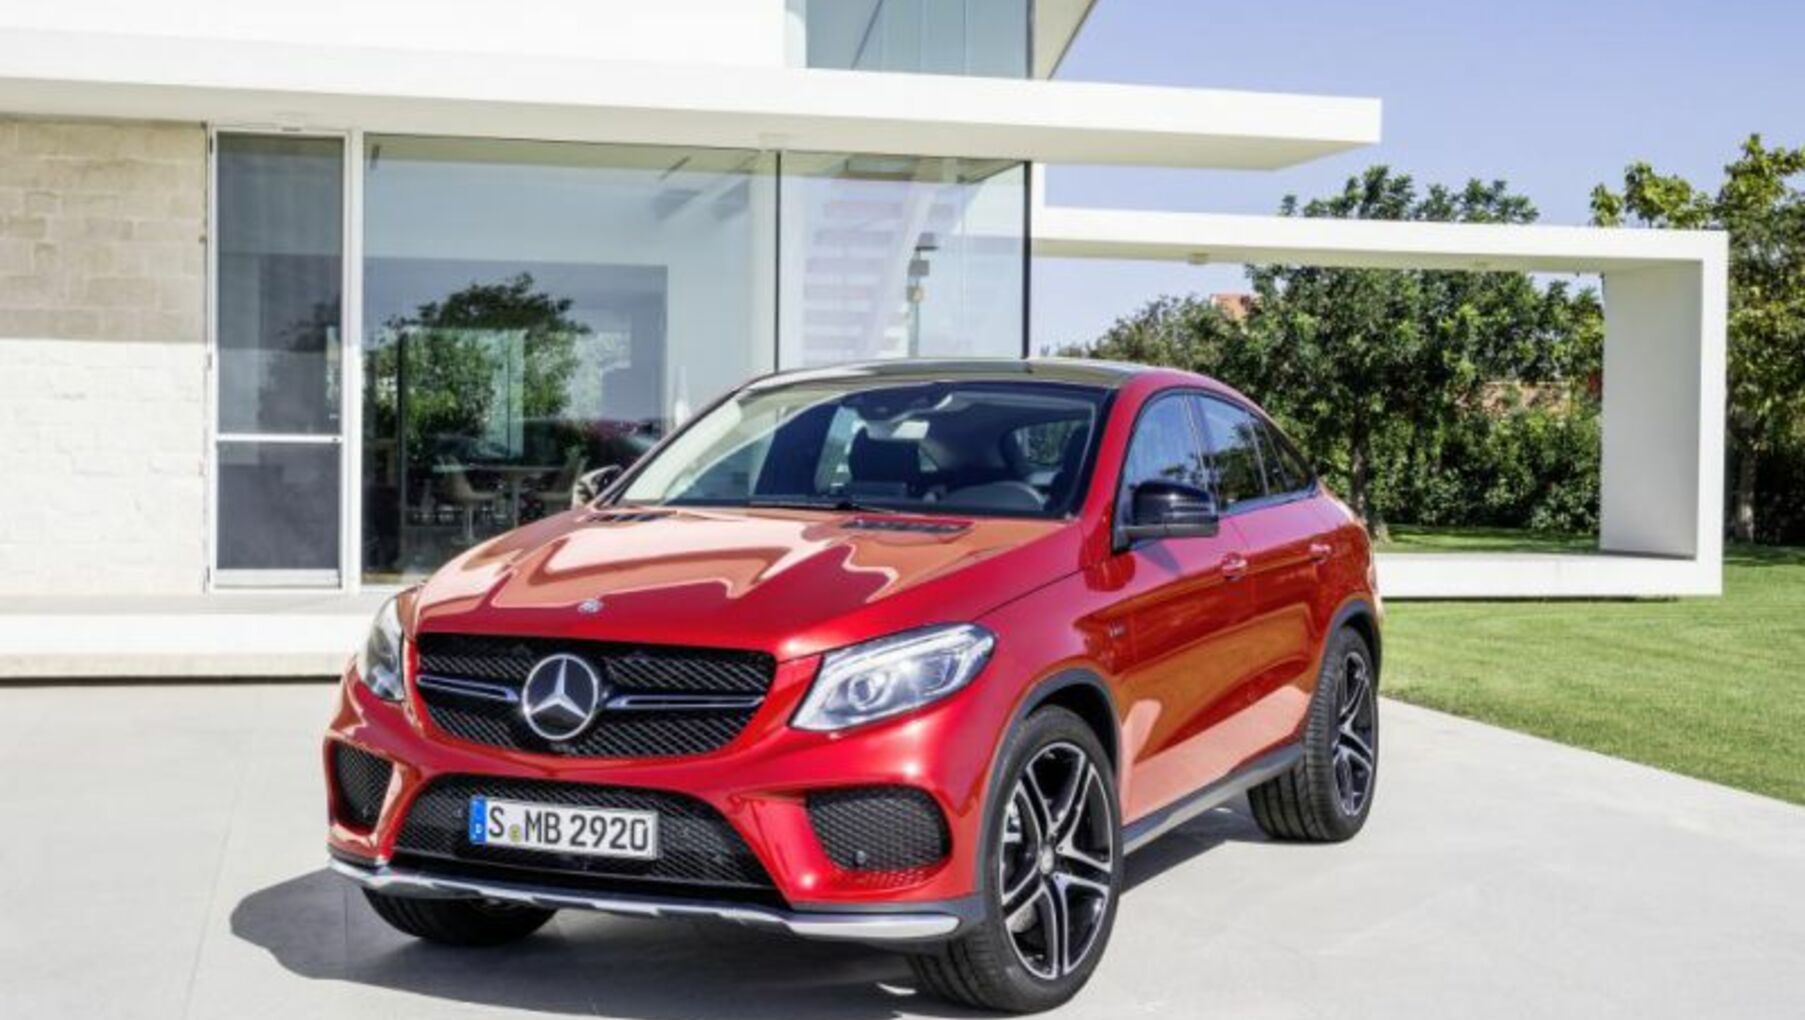 Mercedes-Benz GLE Coupe (C292) AMG GLE 450 (376 Hp) 4MATIC G-TRONIC 2015, 2016, 2017, 2018, 2019, 2020, 2021 